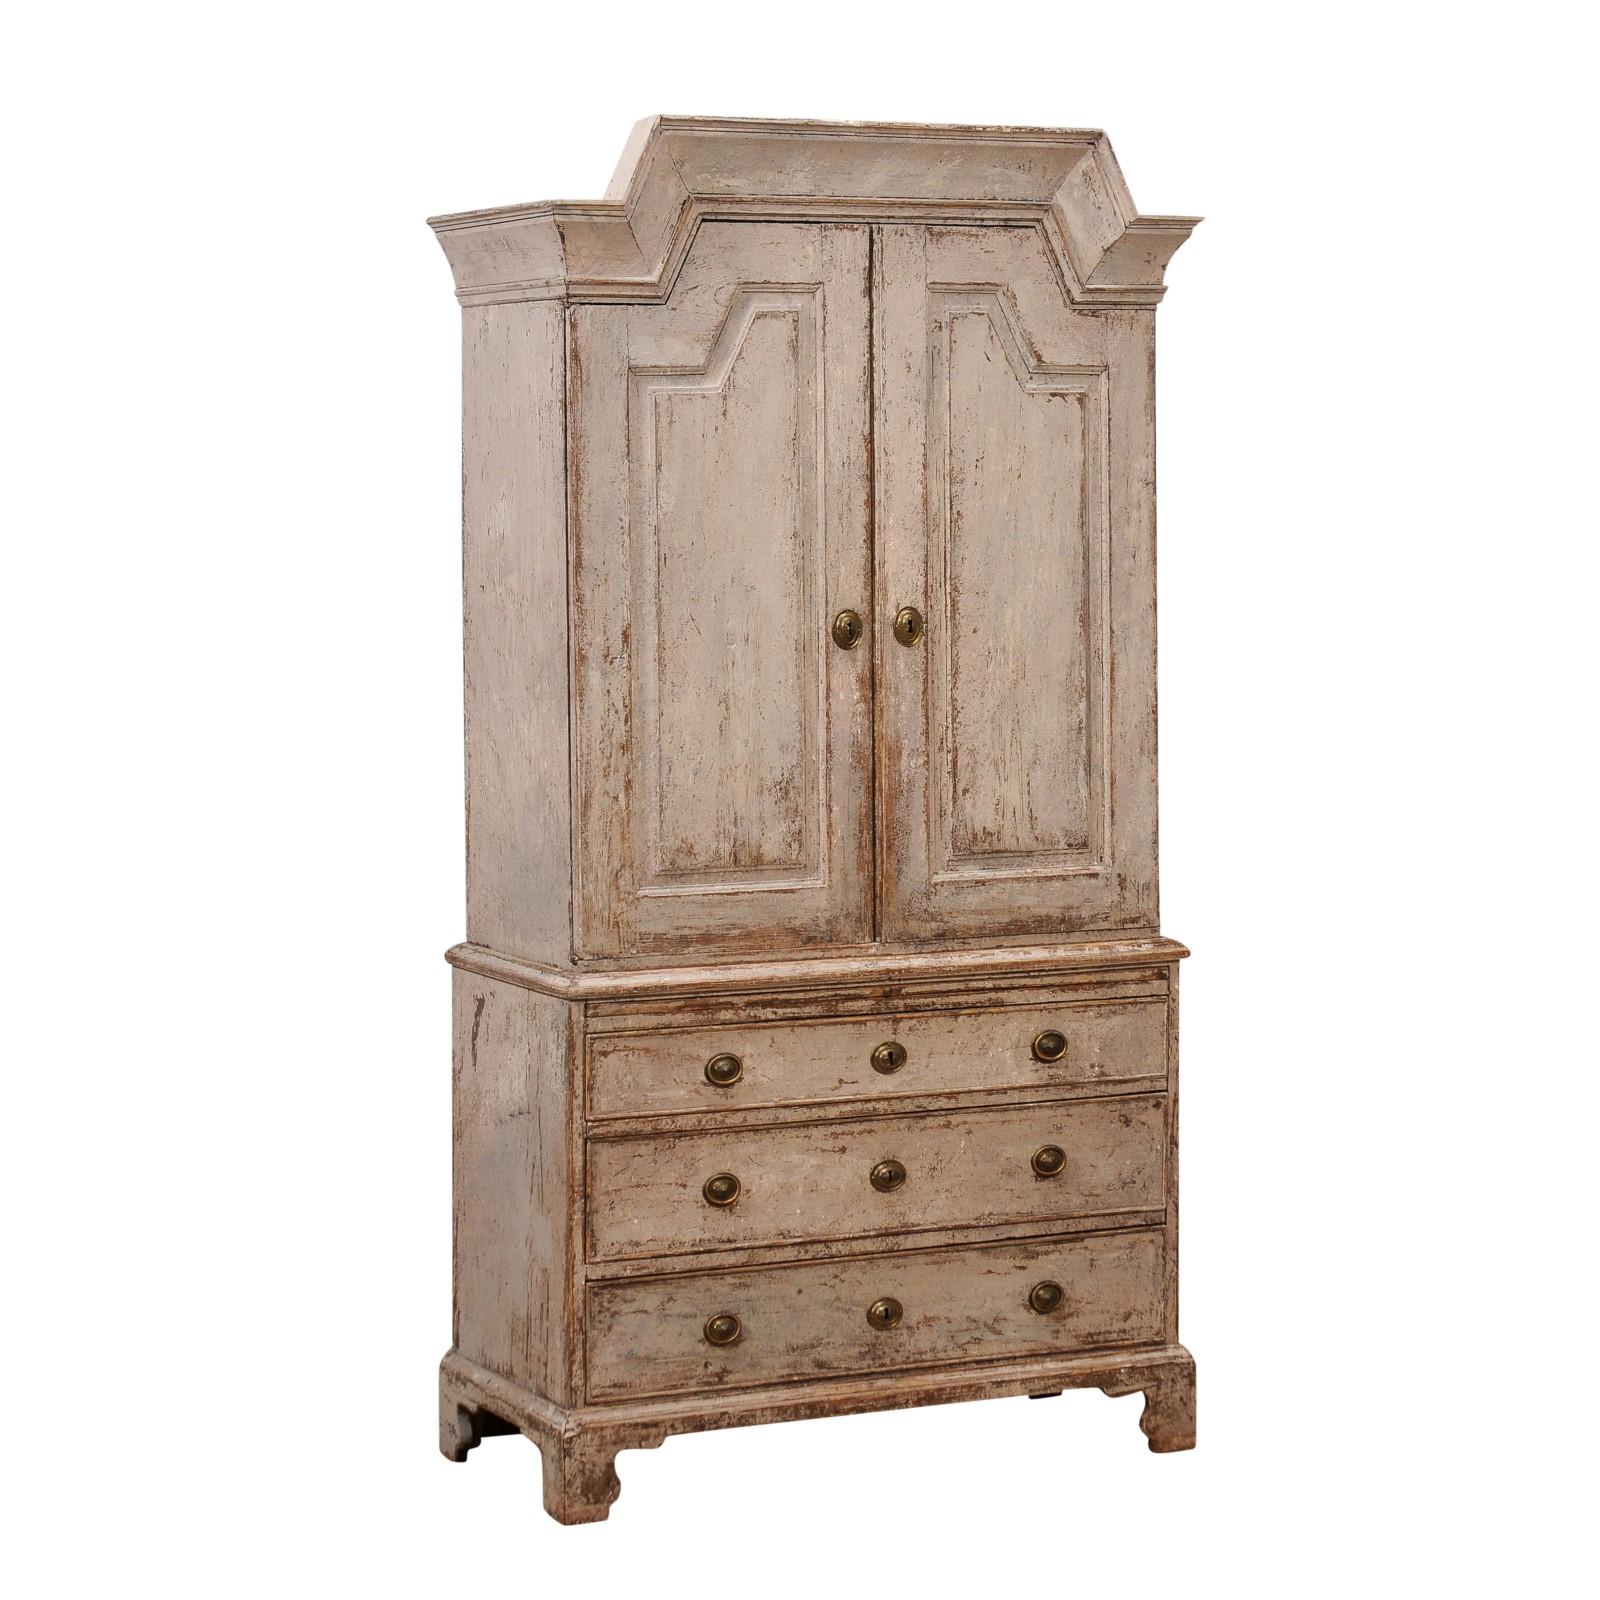 Swedish Gustavian Period 1802 Painted Wood Cupboard with Doors and Drawers For Sale 7